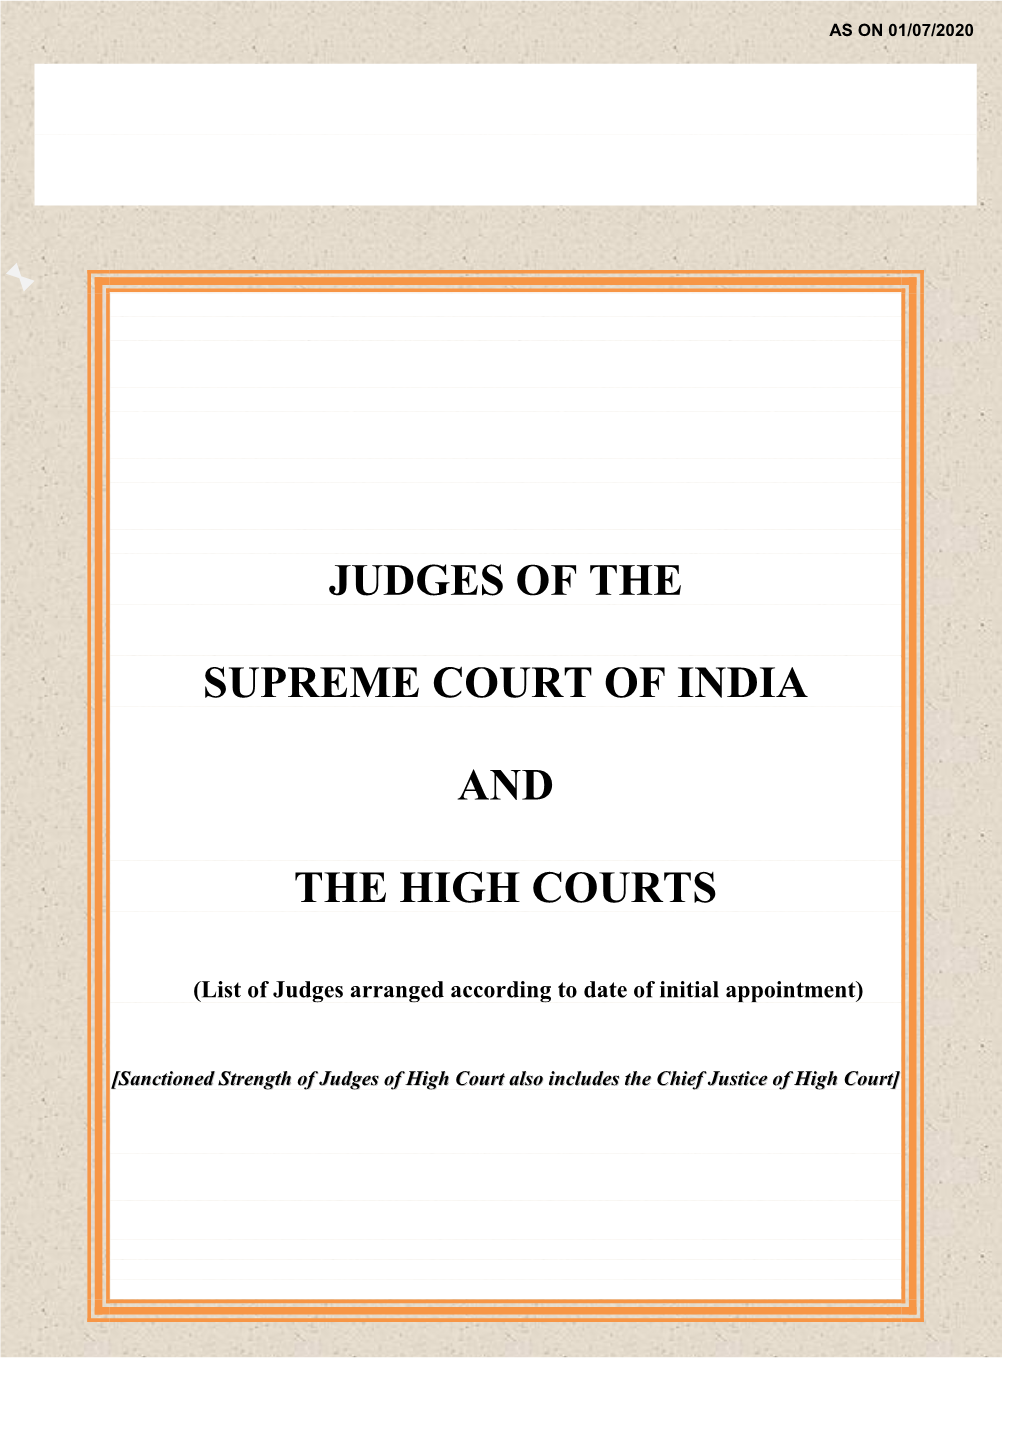 List of Supreme Court and High Courts Judges (As on 01.07.2020)